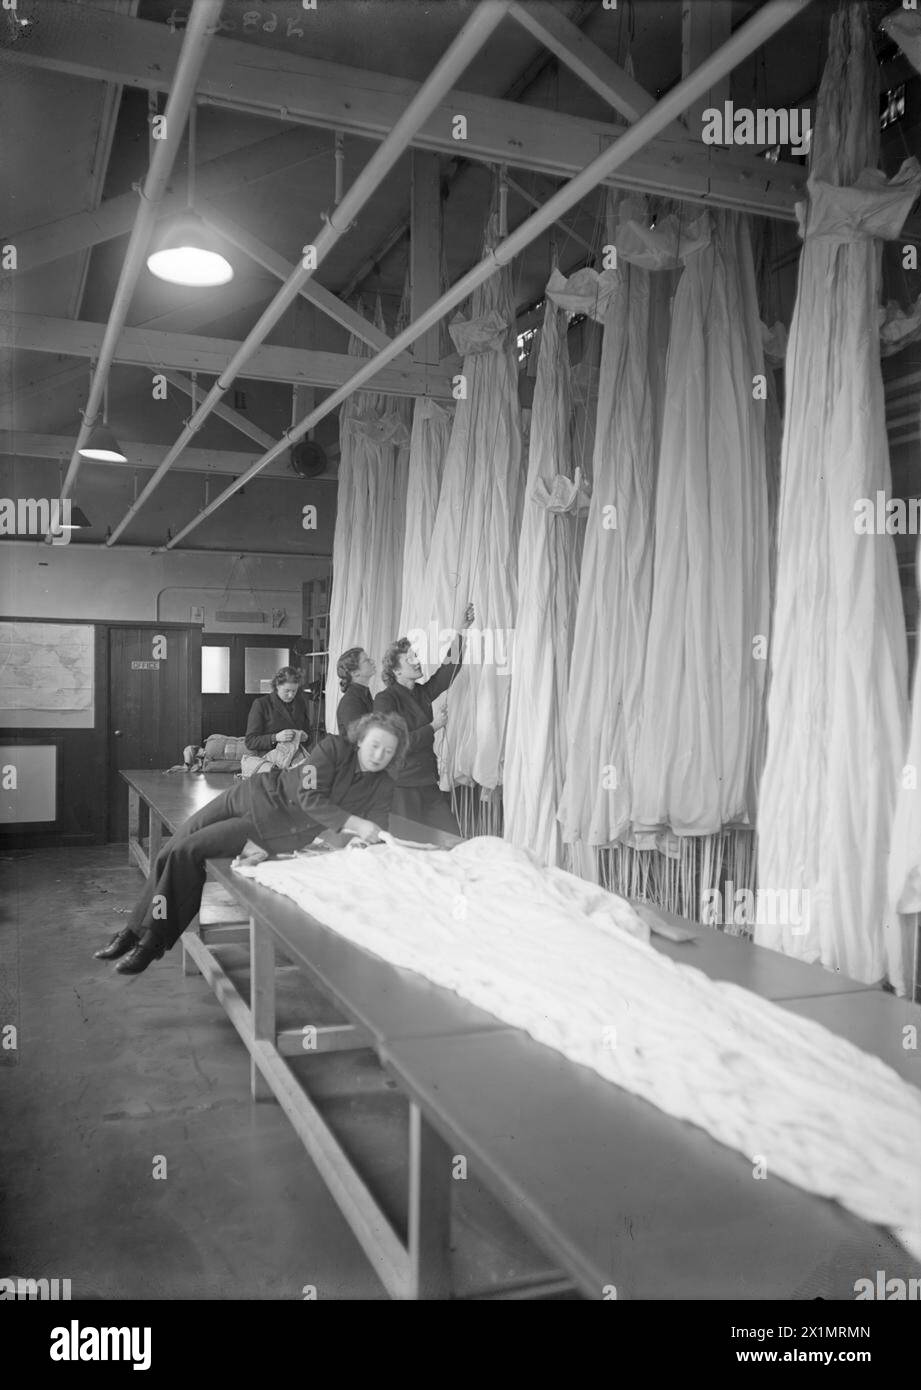 WREN PARACHUTE PACKERS. 20 JANUARY 1944, ROYAL NAVAL AIR STATION ST MERRYN, CORNWALL. - Wren parachute packers straightening out the silk folds before packing, Stock Photo